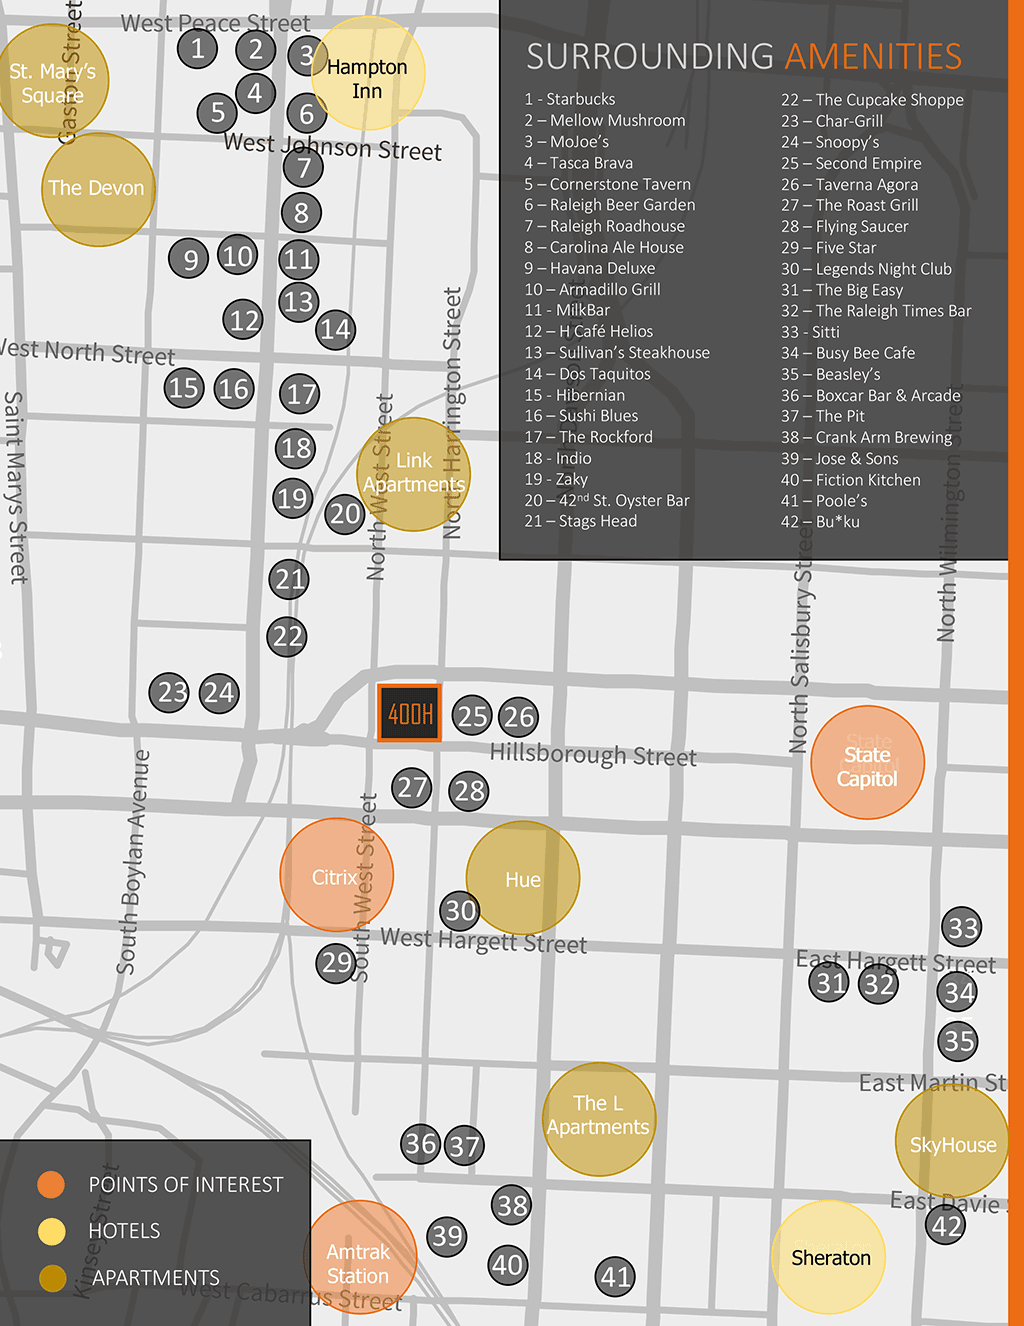 Illustrated map showing amenities in the community